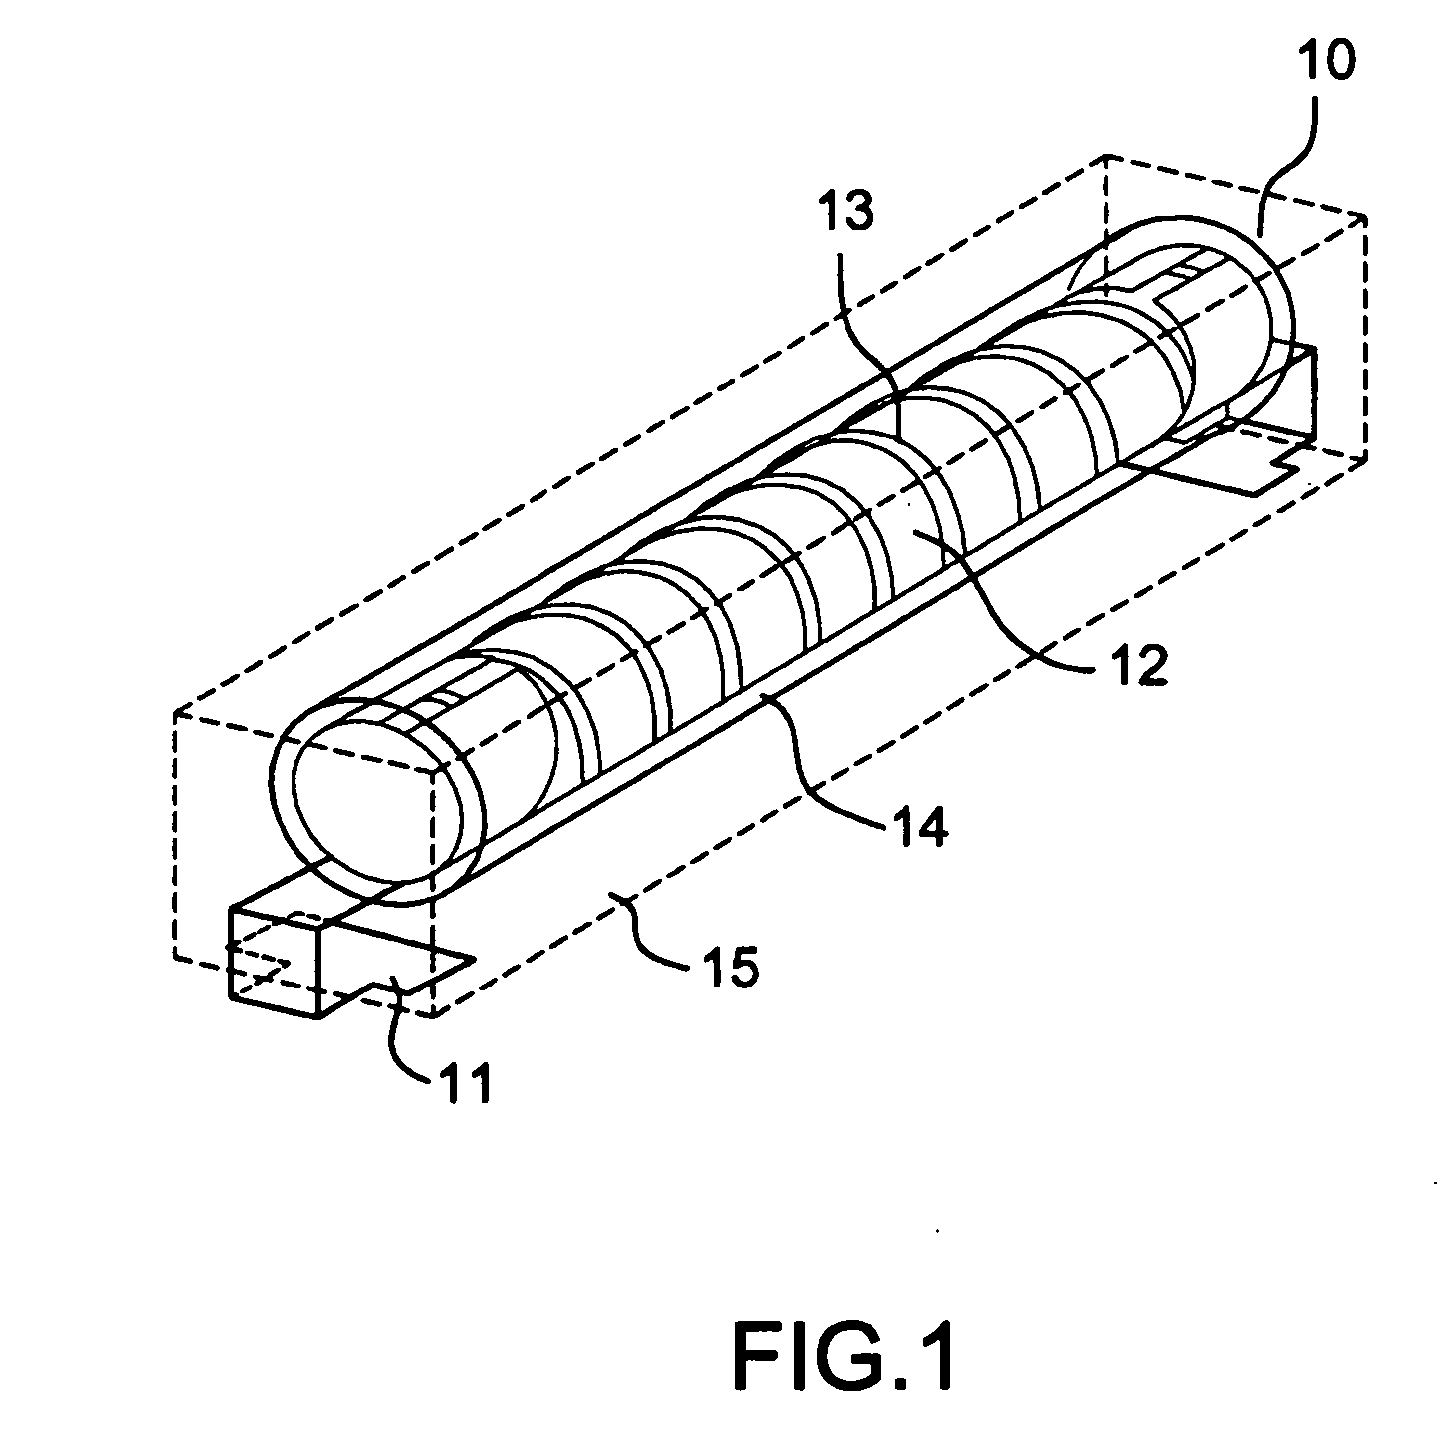 Structure of an over-current protection device and method for manufacturing the same